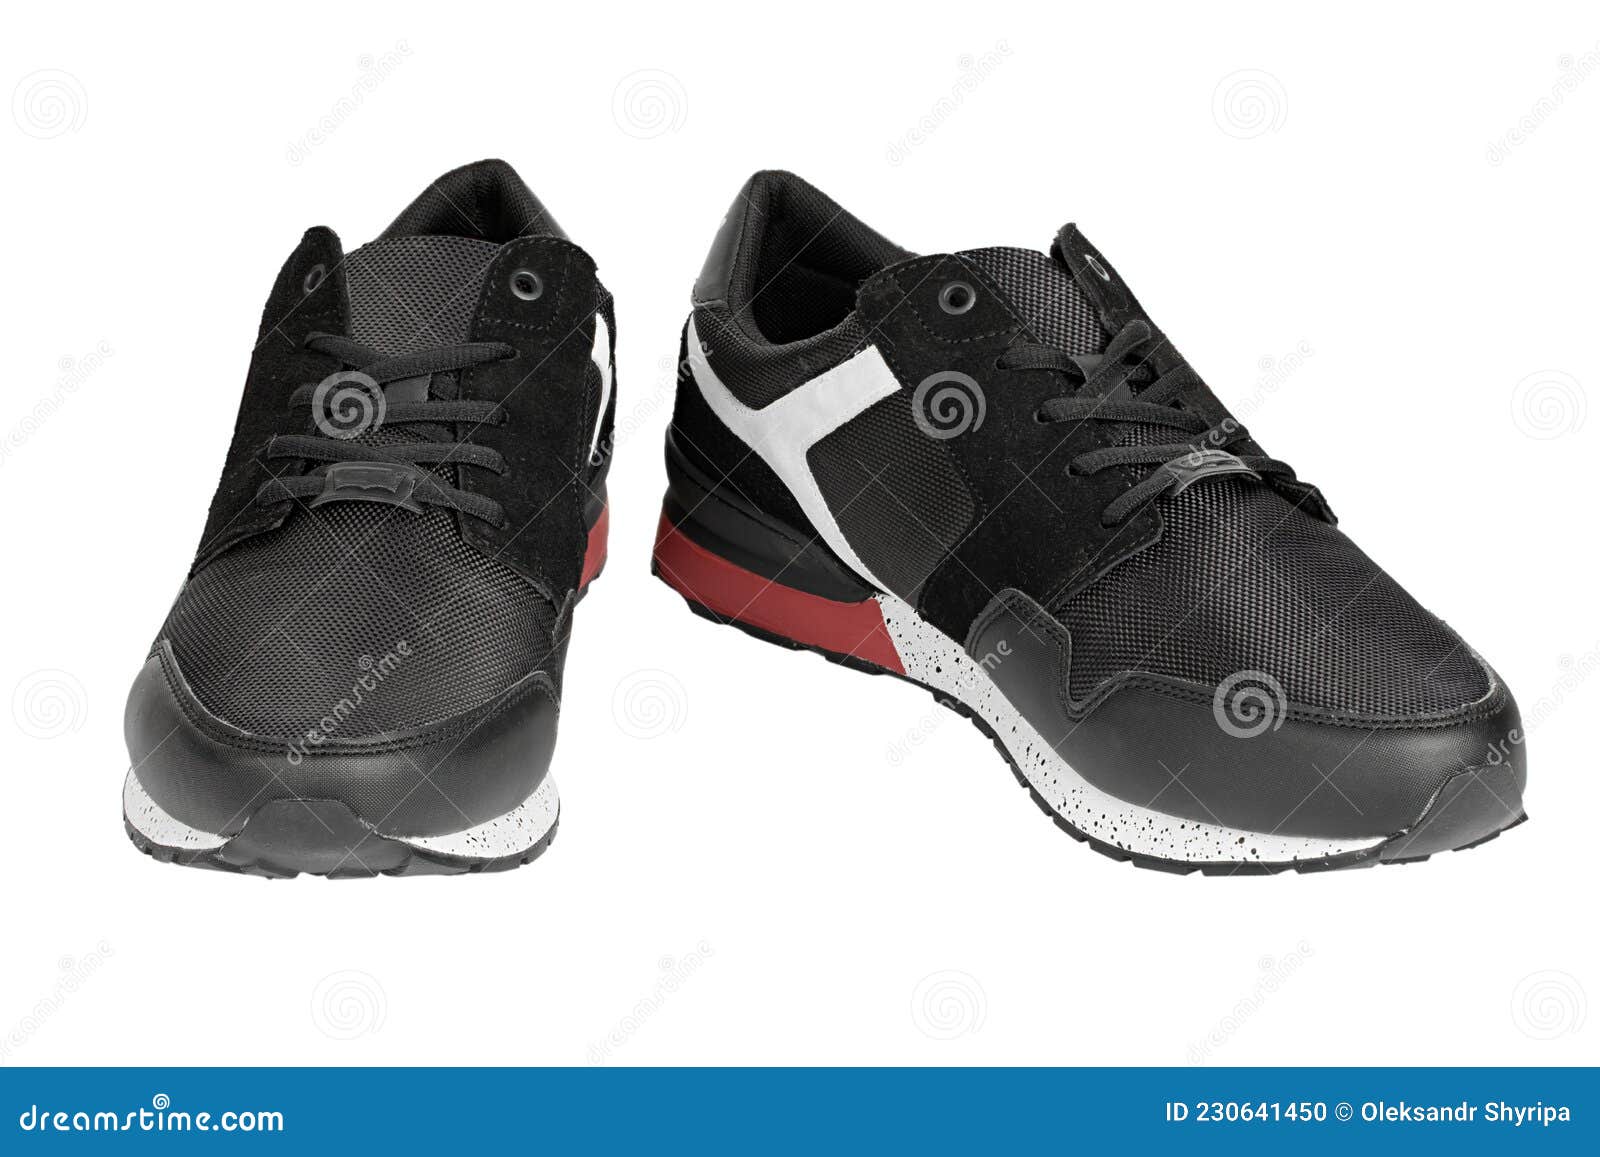 Pair of New Non-branded Black Athletic Trainers or Trainers Isolated on ...